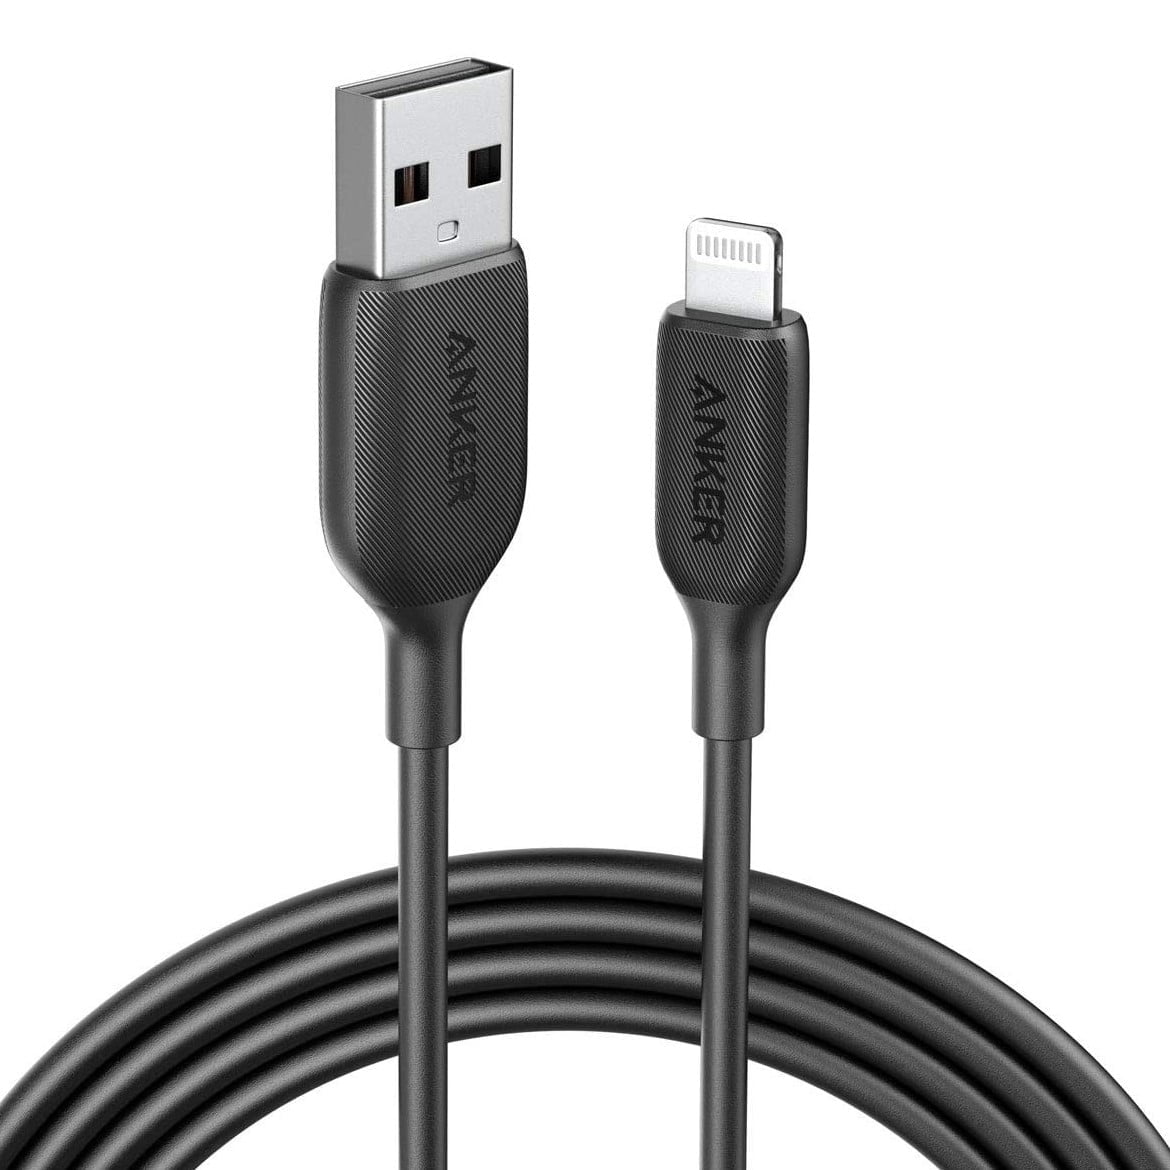 Anker Powerline Iii Lightning Cable 3Ft Charger - Black A8812H11-A